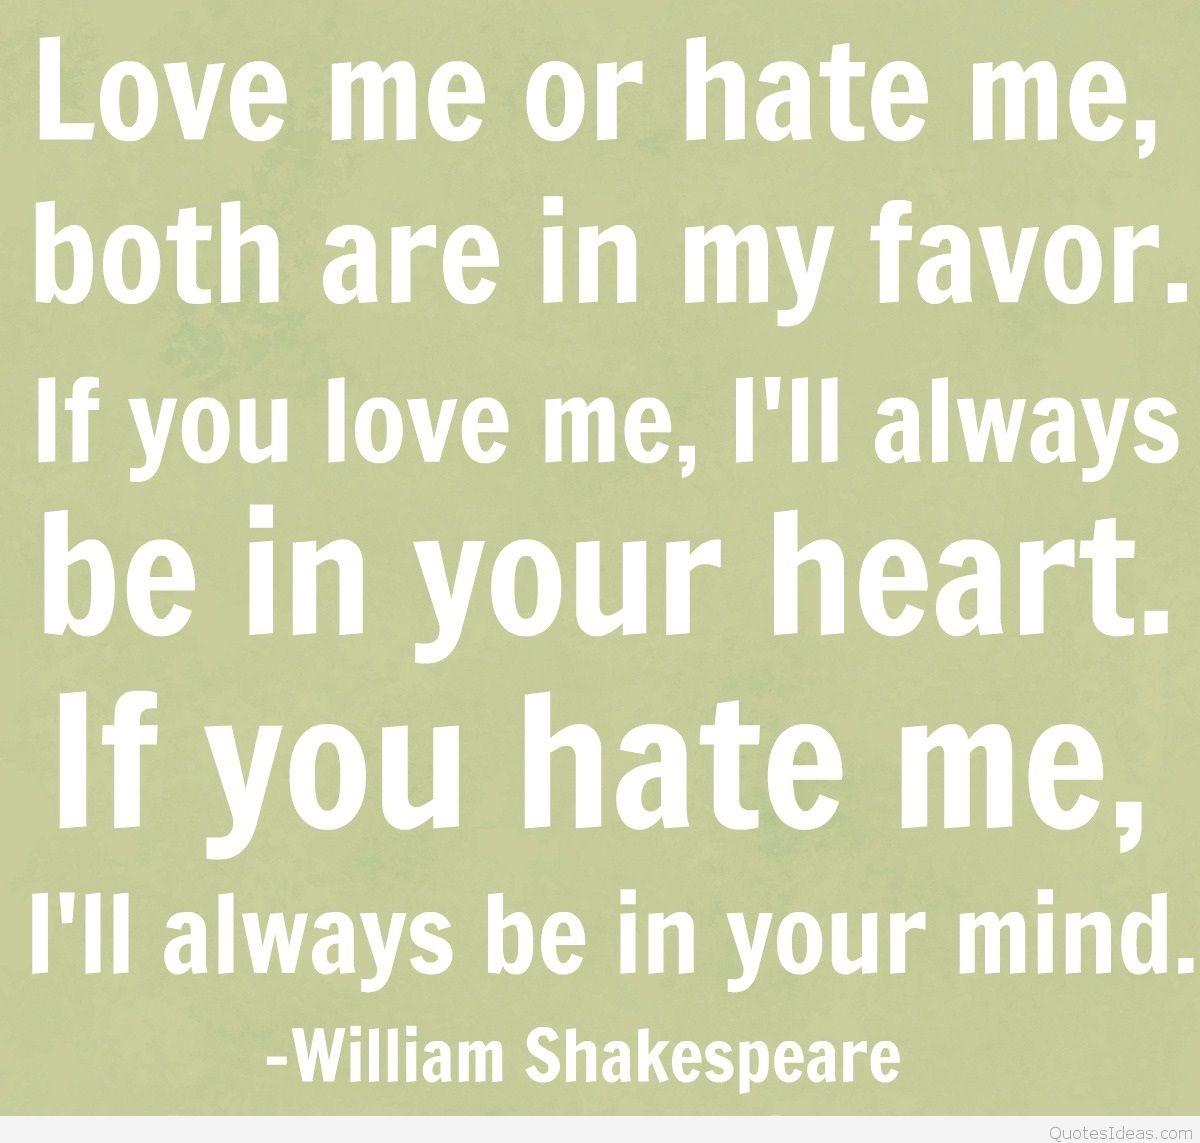 Hate Love Quotes Image. Love quotes collection within HD